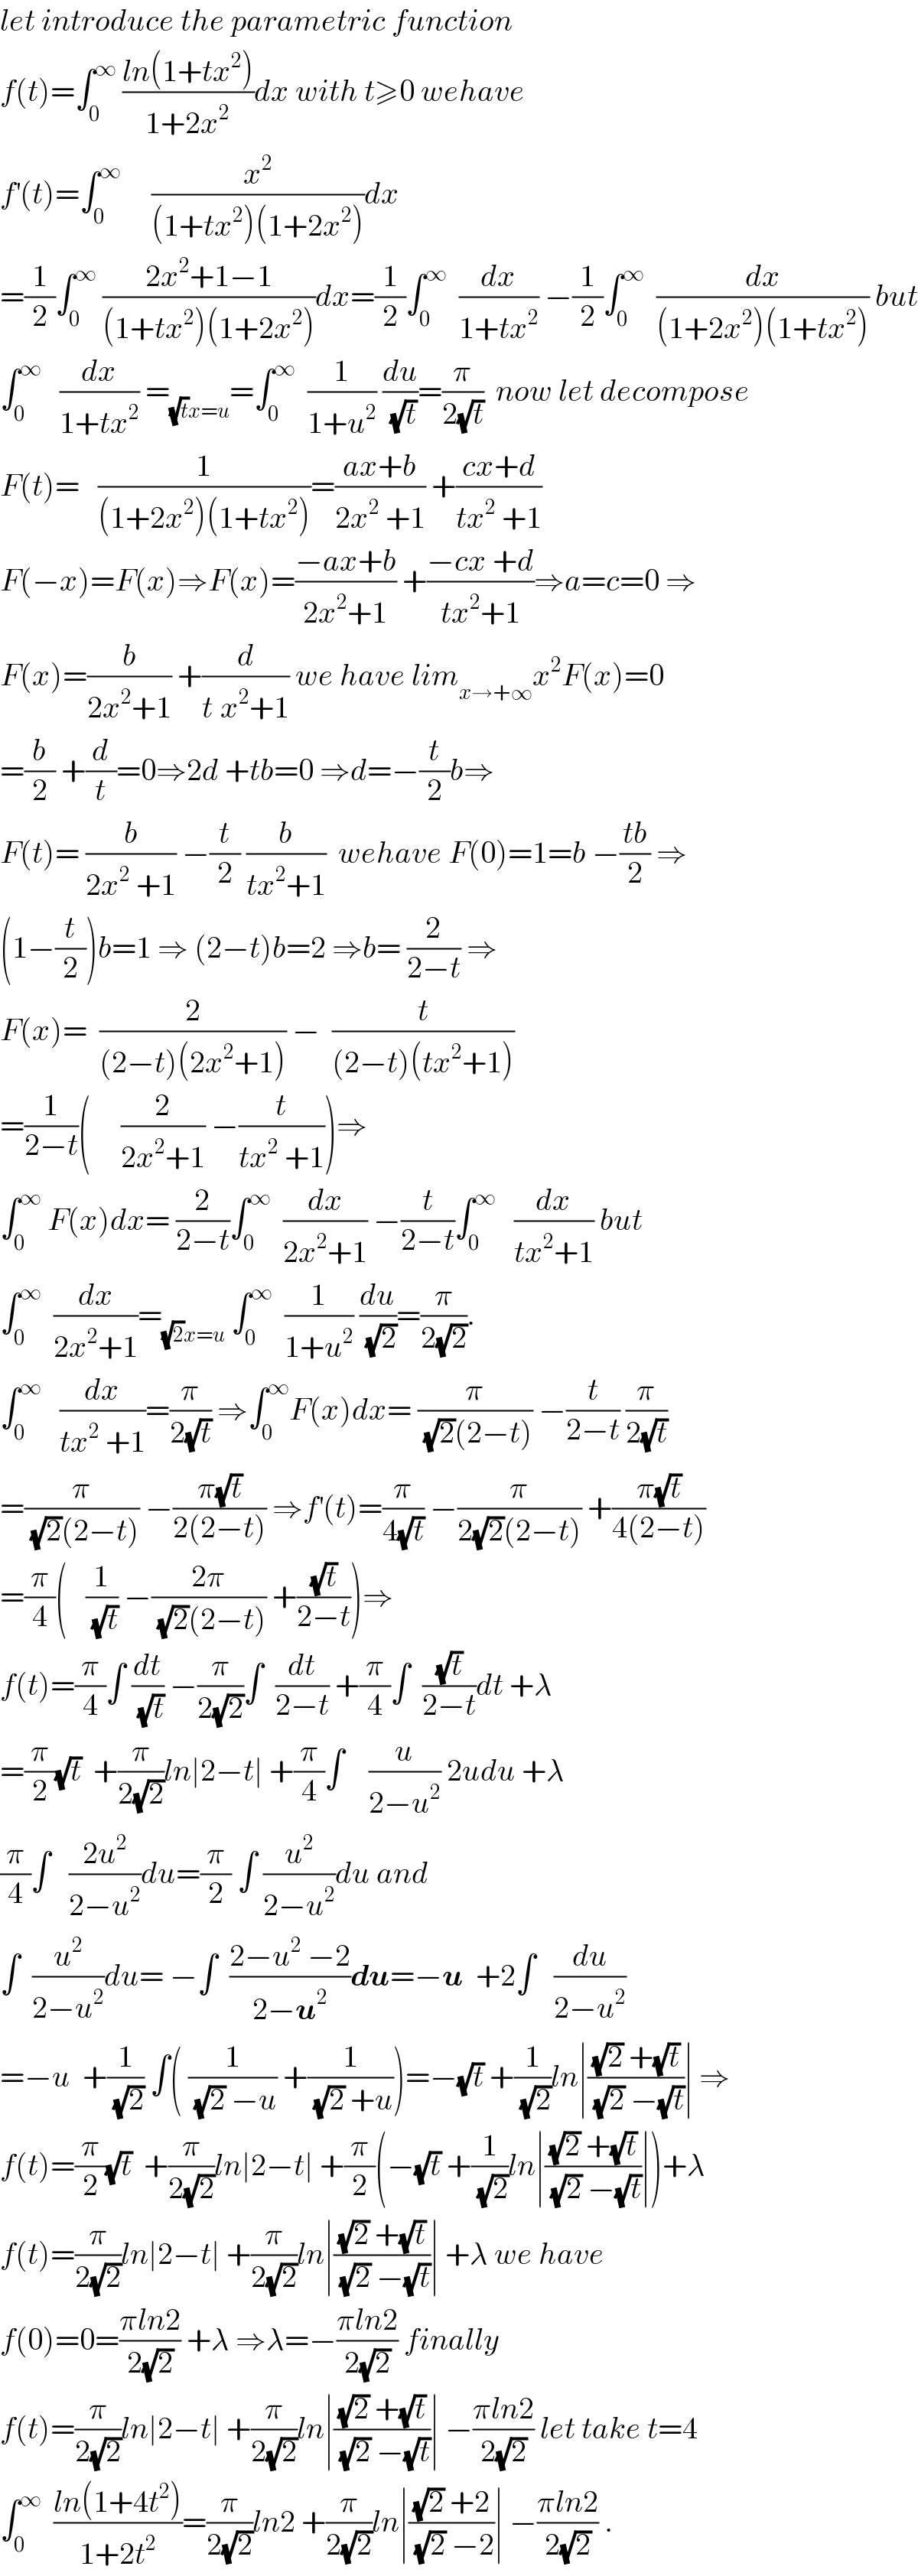 let introduce the parametric function  f(t)=∫_0 ^∞  ((ln(1+tx^2 ))/(1+2x^2 ))dx with t≥0 wehave  f^′ (t)=∫_0 ^∞      (x^2 /((1+tx^2 )(1+2x^2 )))dx  =(1/2)∫_0 ^∞  ((2x^2 +1−1)/((1+tx^2 )(1+2x^2 )))dx=(1/2)∫_0 ^∞   (dx/(1+tx^2 )) −(1/2)∫_0 ^∞   (dx/((1+2x^2 )(1+tx^2 ))) but  ∫_0 ^∞    (dx/(1+tx^2 )) =_((√t)x=u) =∫_0 ^∞   (1/(1+u^2 )) (du/(√t))=(π/(2(√t)))  now let decompose  F(t)=   (1/((1+2x^2 )(1+tx^2 )))=((ax+b)/(2x^2  +1)) +((cx+d)/(tx^2  +1))  F(−x)=F(x)⇒F(x)=((−ax+b)/(2x^2 +1)) +((−cx +d)/(tx^2 +1))⇒a=c=0 ⇒  F(x)=(b/(2x^2 +1)) +(d/(t^ x^2 +1)) we have lim_(x→+∞) x^2 F(x)=0  =(b/2) +(d/t)=0⇒2d +tb=0 ⇒d=−(t/2)b⇒  F(t)= (b/(2x^2  +1)) −(t/2) (b/(tx^2 +1))  wehave F(0)=1=b −((tb)/2) ⇒  (1−(t/2))b=1 ⇒ (2−t)b=2 ⇒b= (2/(2−t)) ⇒  F(x)=  (2/((2−t)(2x^2 +1))) −  (t/((2−t)(tx^2 +1)))  =(1/(2−t))(     (2/(2x^2 +1)) −(t/(tx^2  +1)))⇒  ∫_0 ^∞  F(x)dx= (2/(2−t))∫_0 ^∞   (dx/(2x^2 +1)) −(t/(2−t))∫_0 ^∞    (dx/(tx^2 +1)) but  ∫_0 ^∞   (dx/(2x^2 +1))=_((√2)x=u)  ∫_0 ^∞   (1/(1+u^2 )) (du/(√2))=(π/(2(√2))).  ∫_0 ^∞    (dx/(tx^2  +1))=(π/(2(√t))) ⇒∫_0 ^∞ F(x)dx= (π/((√2)(2−t))) −(t/(2−t)) (π/(2(√t)))  =(π/((√2)(2−t))) −((π(√t))/(2(2−t))) ⇒f^′ (t)=(π/(4(√t))) −(π/(2(√2)(2−t))) +((π(√t))/(4(2−t)))  =(π/4)(   (1/(√t)) −((2π)/((√2)(2−t))) +((√t)/(2−t)))⇒  f(t)=(π/4)∫ (dt/(√t)) −(π/(2(√2)))∫  (dt/(2−t)) +(π/4)∫  ((√t)/(2−t))dt +λ  =(π/2)(√t)  +(π/(2(√2)))ln∣2−t∣ +(π/4)∫    (u/(2−u^2 )) 2udu +λ  (π/4)∫   ((2u^2 )/(2−u^2 ))du=(π/2) ∫ (u^2 /(2−u^2 ))du and  ∫  (u^2 /(2−u^2 ))du= −∫  ((2−u^2  −2)/(2−u^2 ))du=−u  +2∫   (du/(2−u^2 ))  =−u  +(1/(√2)) ∫( (1/((√2) −u)) +(1/((√2) +u)))=−(√t) +(1/(√2))ln∣(((√2) +(√t))/((√2) −(√t)))∣ ⇒  f(t)=(π/2)(√t)  +(π/(2(√2)))ln∣2−t∣ +(π/2)(−(√t) +(1/(√2))ln∣(((√2) +(√t))/((√2) −(√t)))∣)+λ  f(t)=(π/(2(√2)))ln∣2−t∣ +(π/(2(√2)))ln∣(((√2) +(√t))/((√2) −(√t)))∣ +λ we have  f(0)=0=((πln2)/(2(√2))) +λ ⇒λ=−((πln2)/(2(√2))) finally  f(t)=(π/(2(√2)))ln∣2−t∣ +(π/(2(√2)))ln∣(((√2) +(√t))/((√2) −(√t)))∣ −((πln2)/(2(√2))) let take t=4  ∫_0 ^∞   ((ln(1+4t^2 ))/(1+2t^2 ))=(π/(2(√2)))ln2 +(π/(2(√2)))ln∣(((√2) +2)/((√2) −2))∣ −((πln2)/(2(√2))) .  